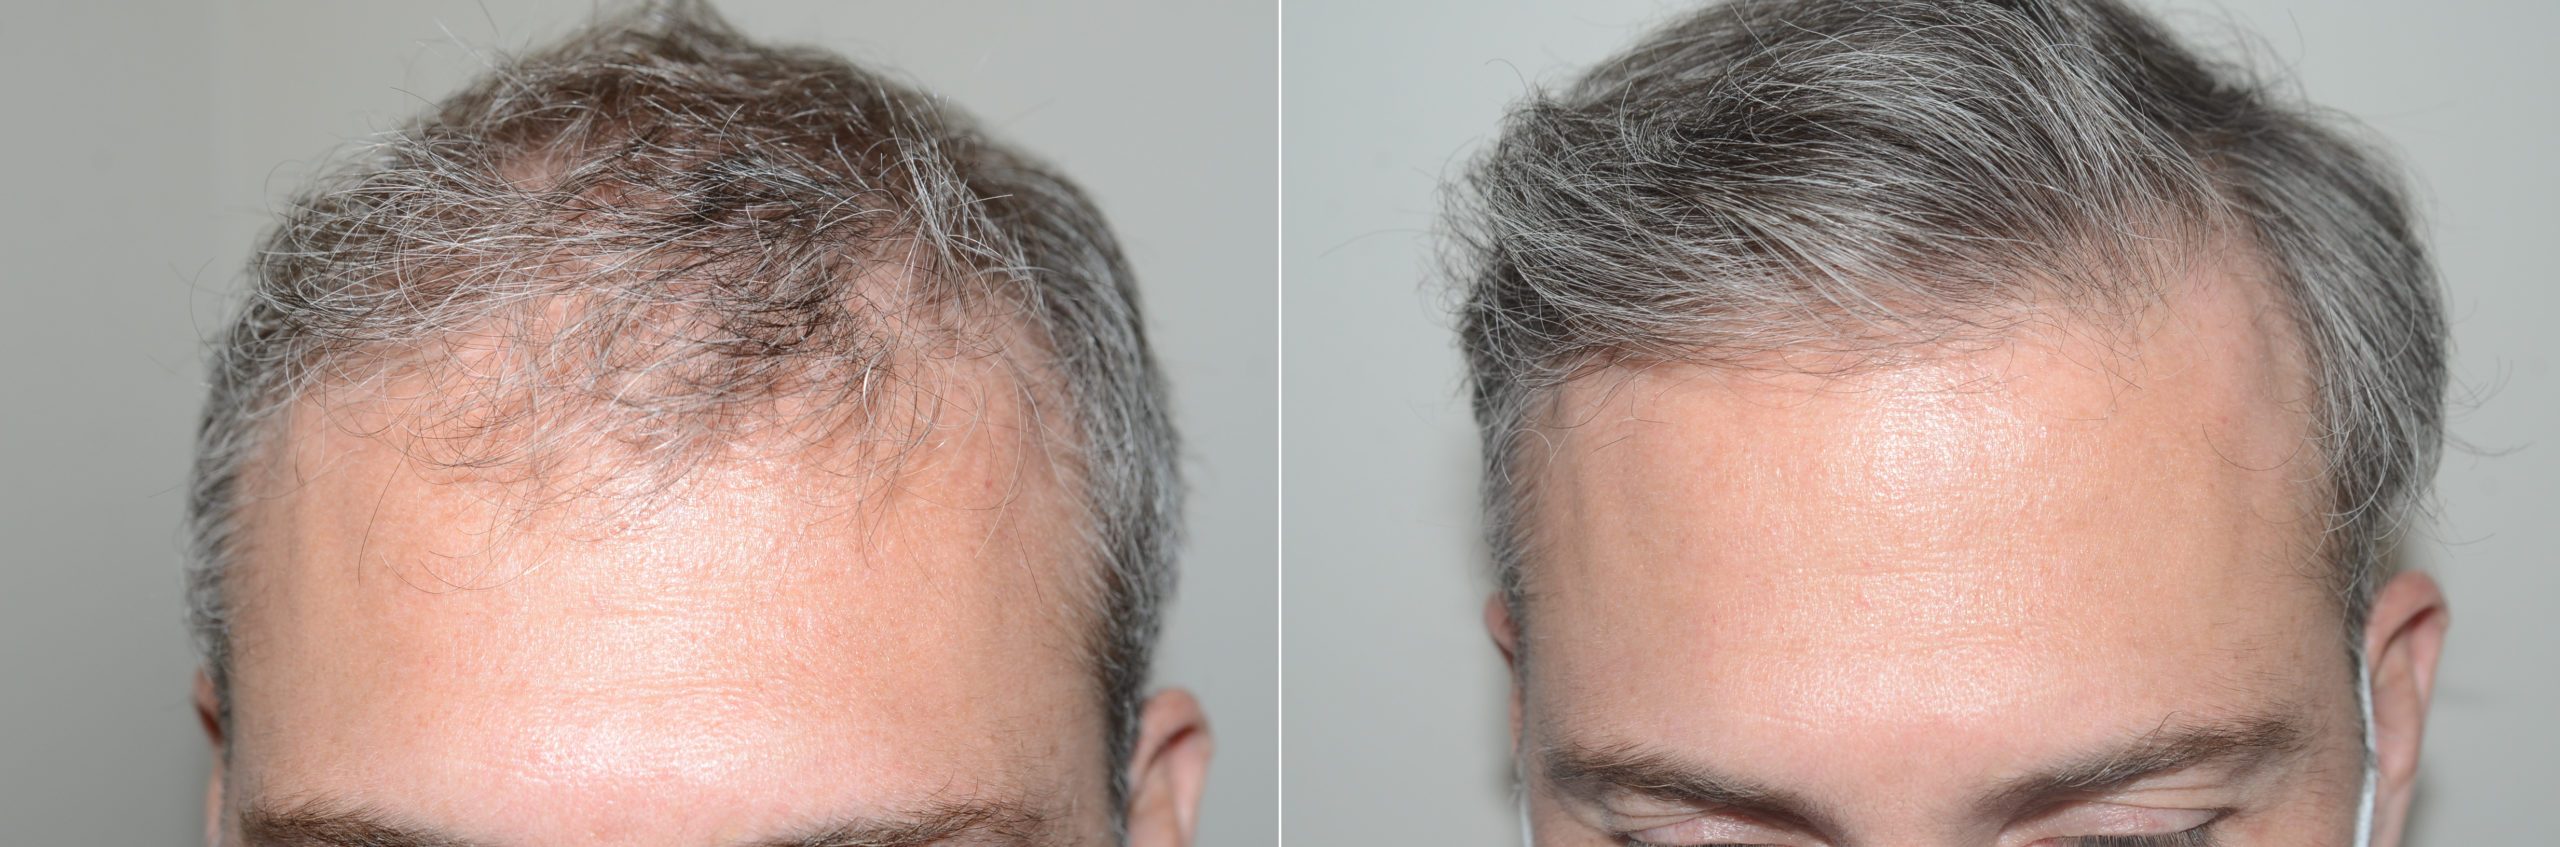 Hair Transplants for Men Before and After Photos - Foundation For Hair  Restoration